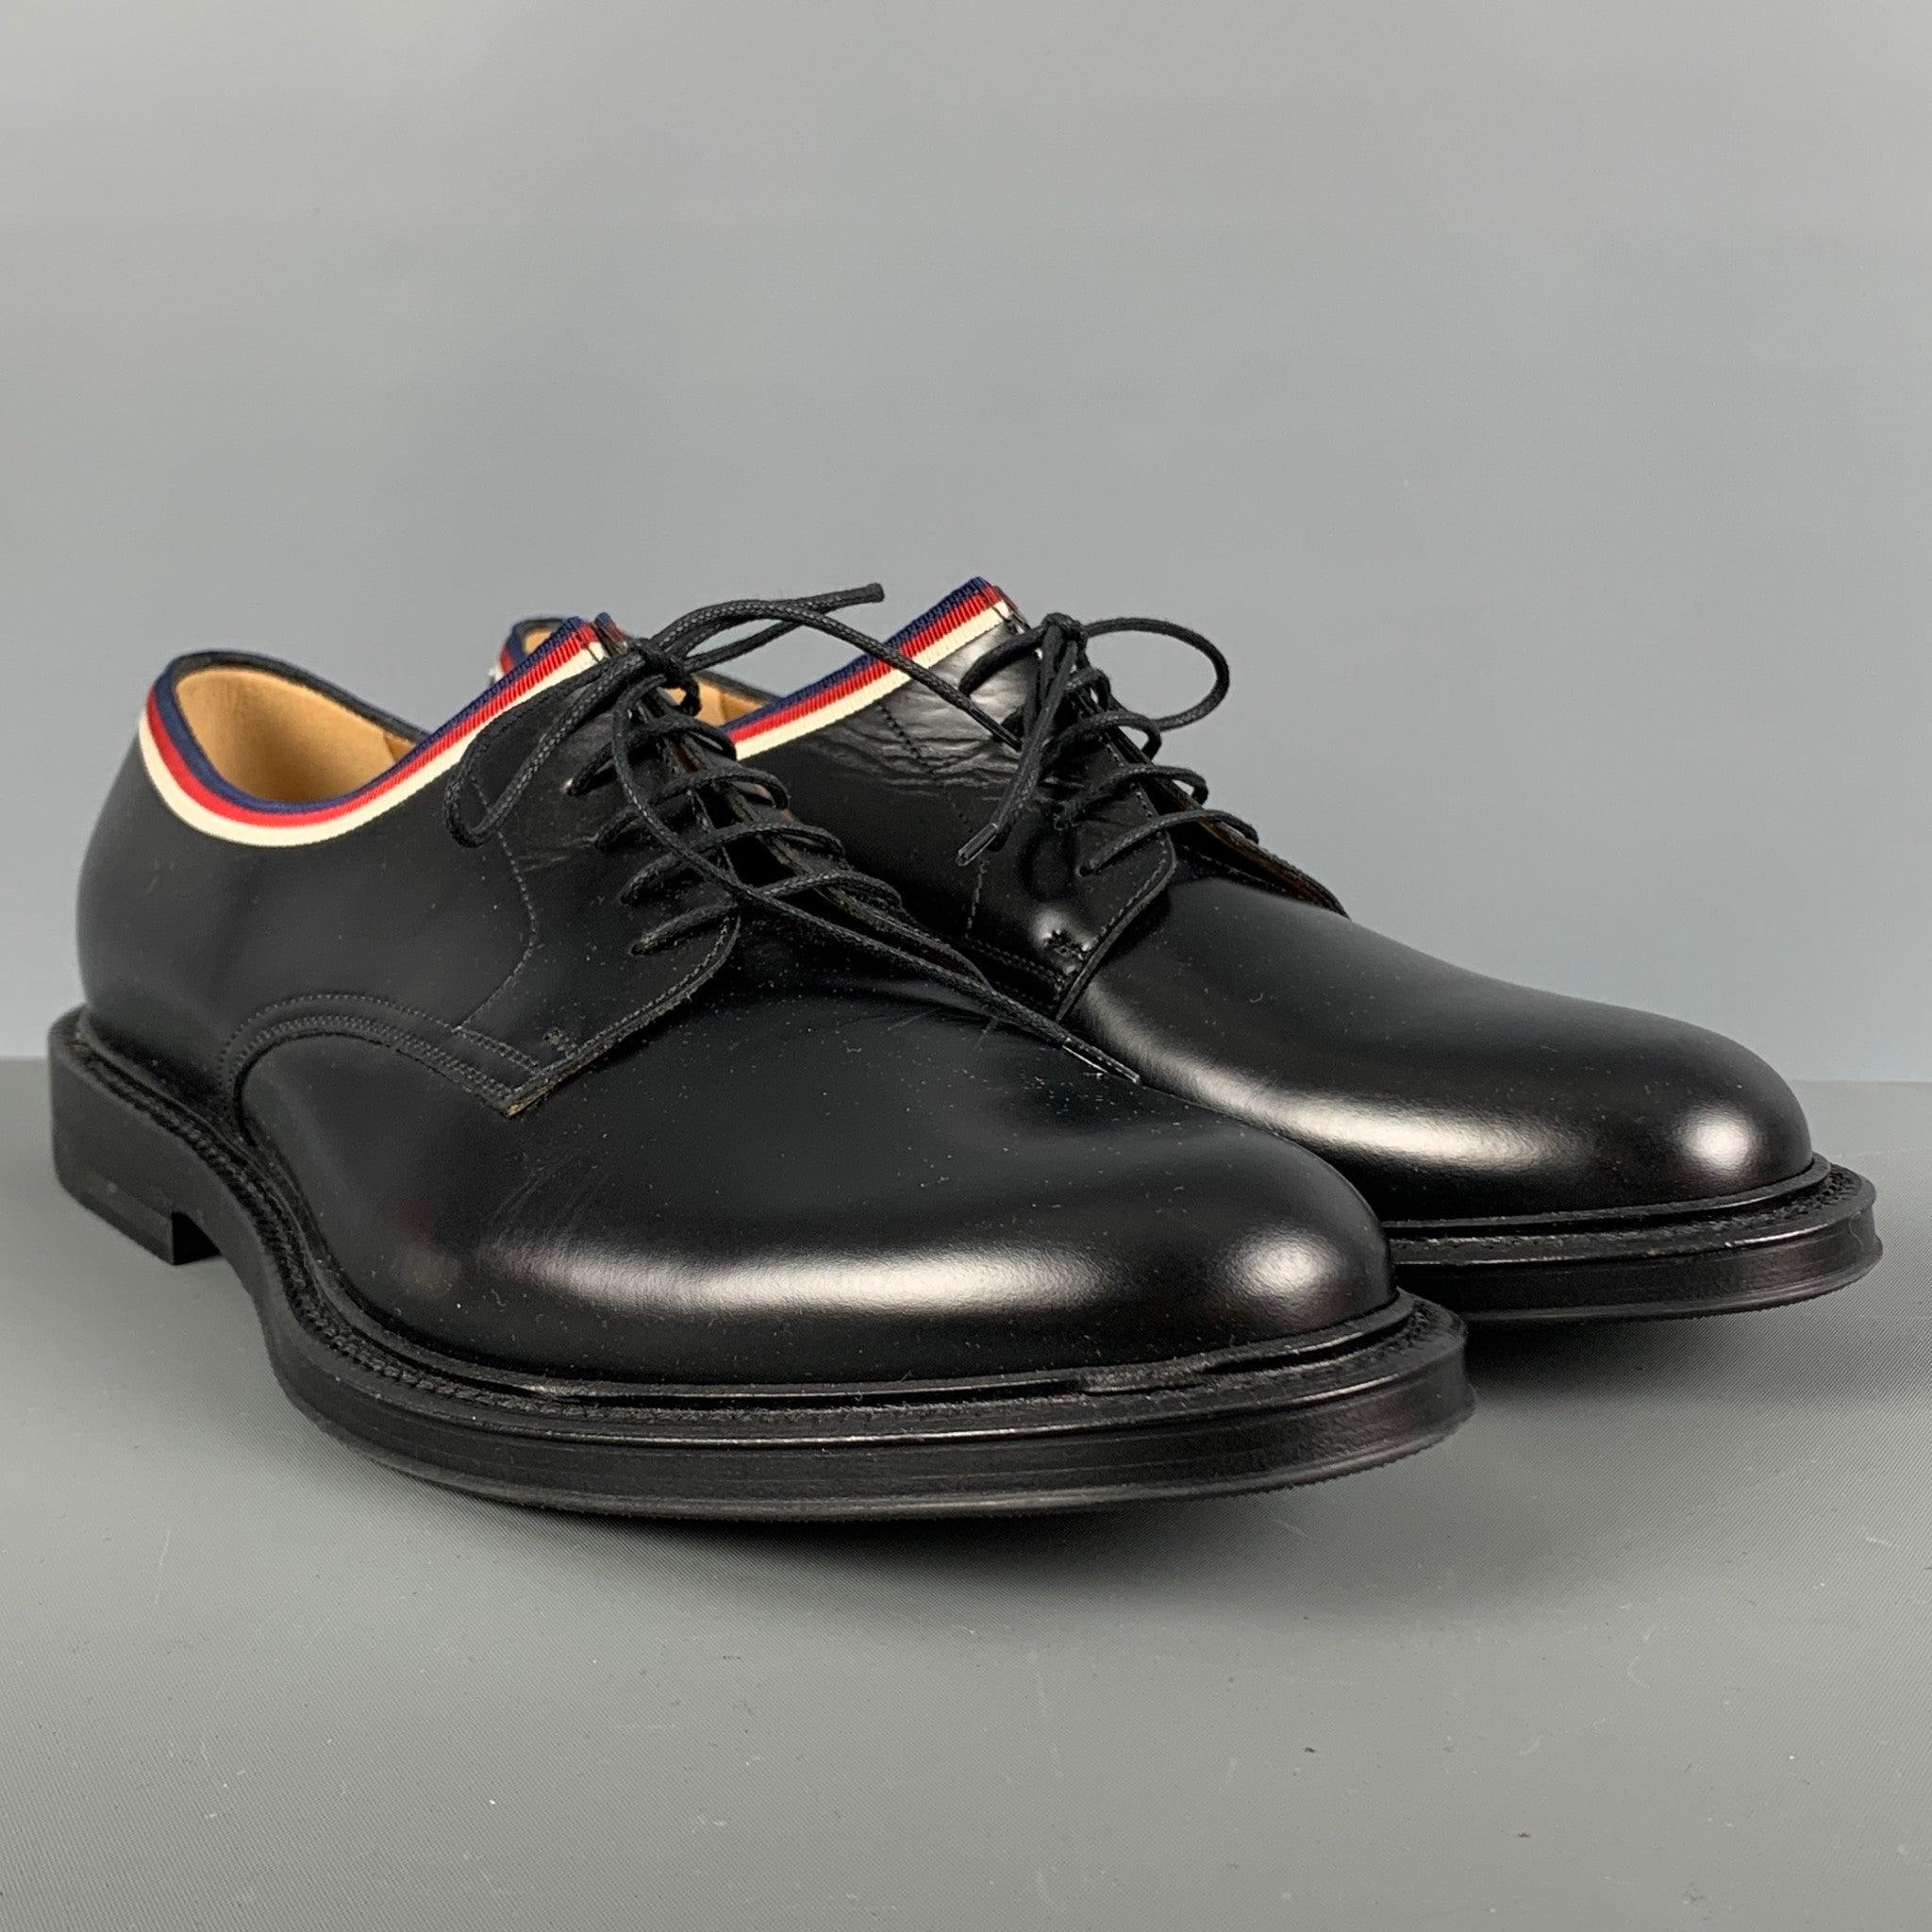 GUCCI shoes comes in a black leather featuring a derby style, blue, red and white ribbon detail, and a lace up closure. Made in Italy.Excellent Pre-Owned Condition. 

Marked:   472749 91/2 04JOutsole: 12.5 inches  x 4.75 inches 
  
  
 
Reference: